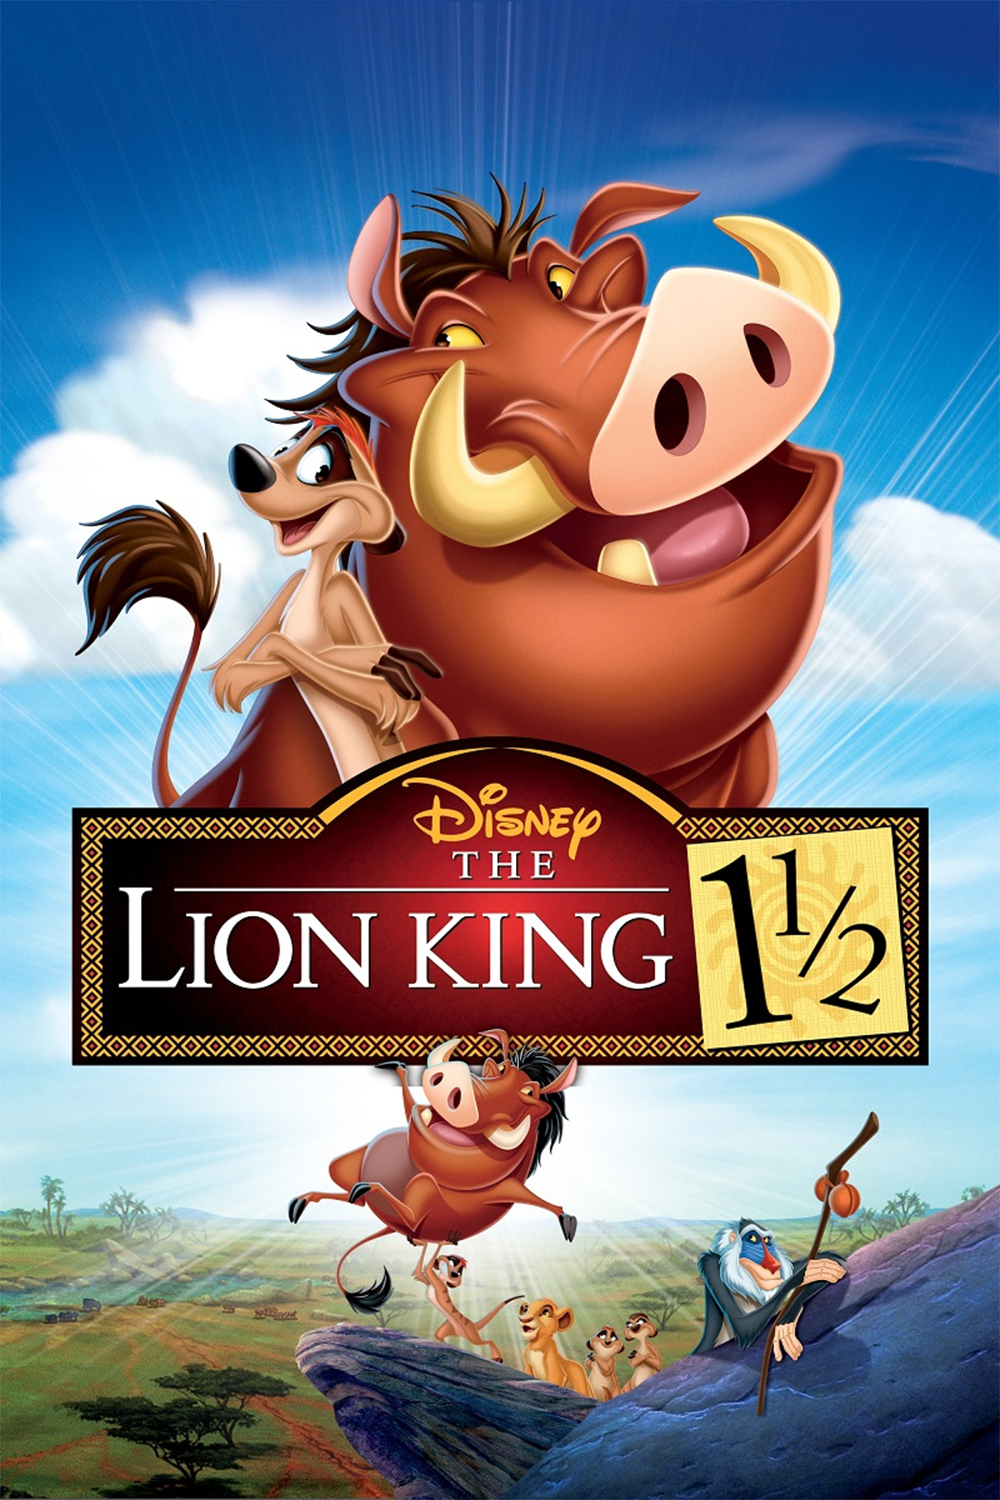 The Lion King 1 1/2 / The Lion King 1½